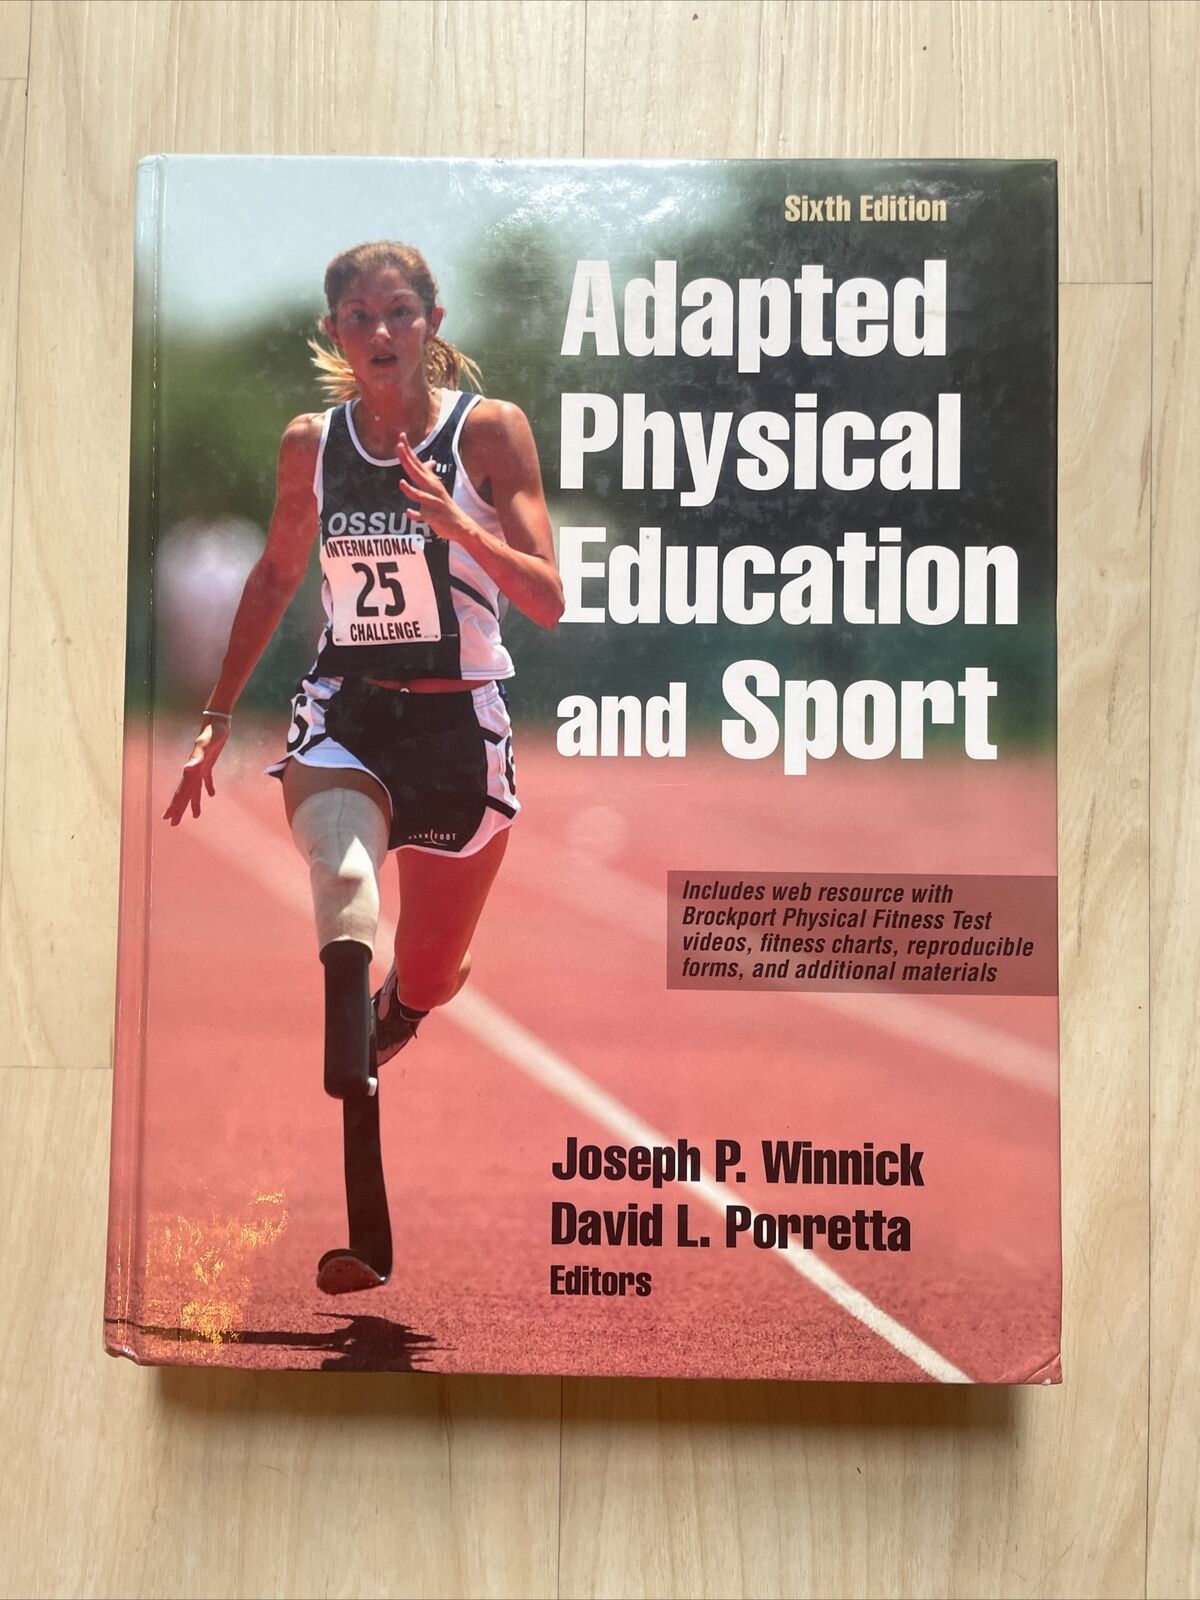 Adapted Physical Education and Sport by David L. Porretta and Winnick. Like New